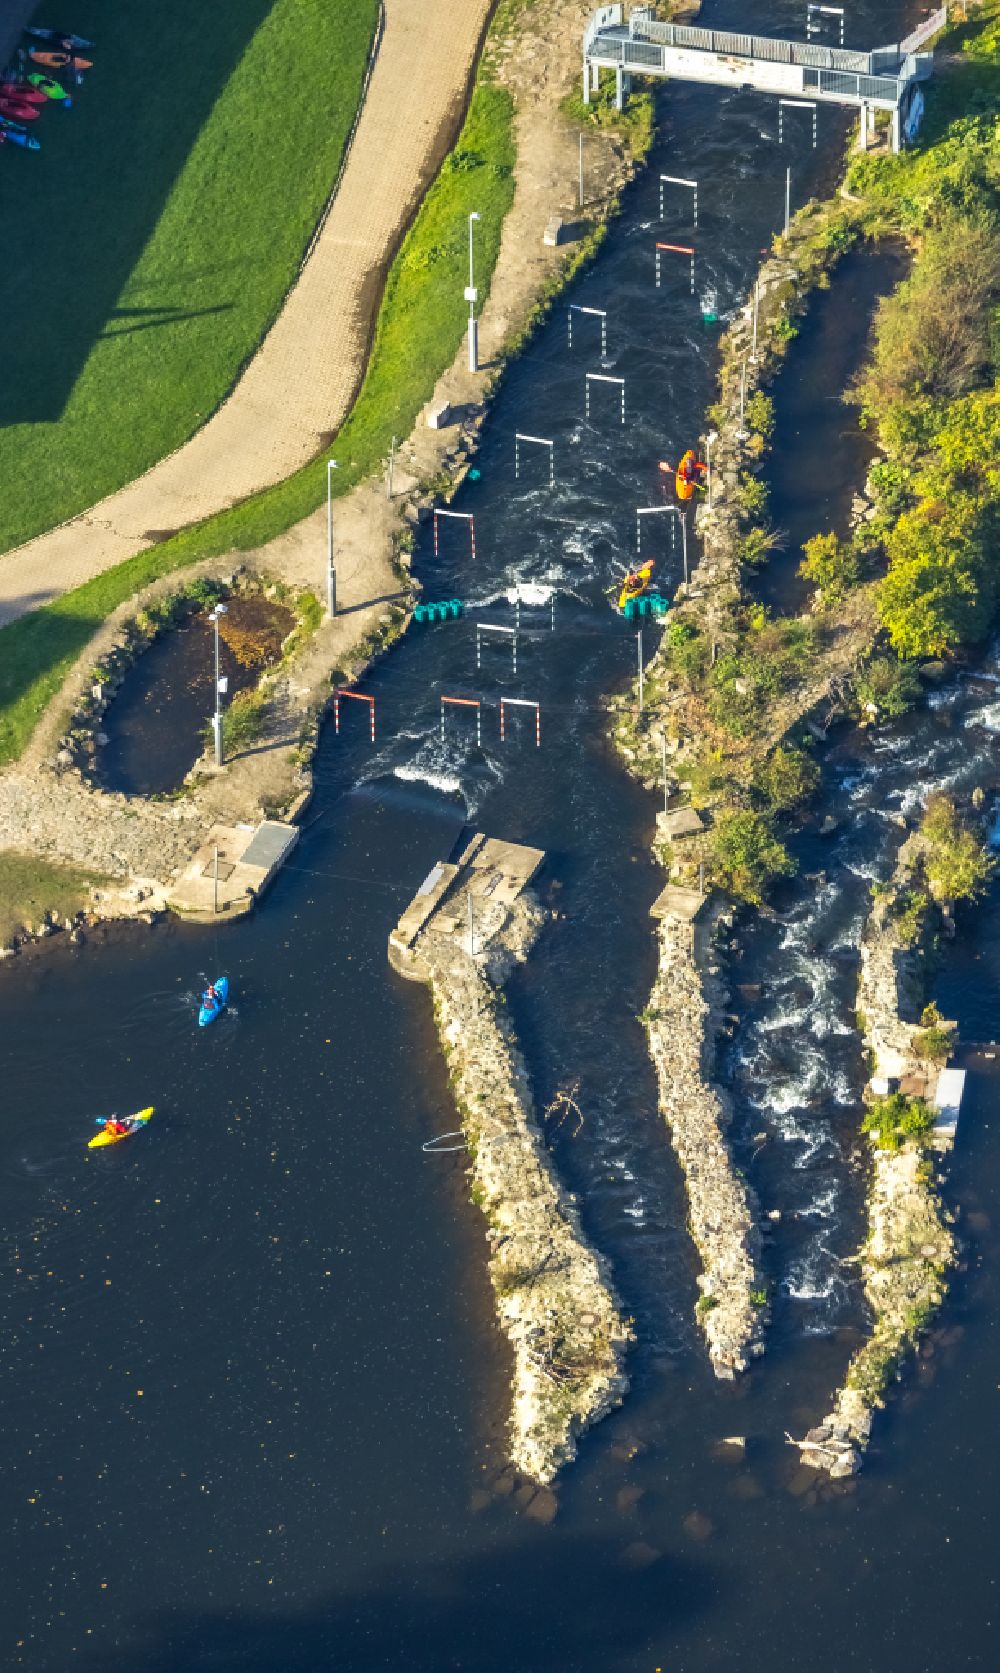 Hagen from the bird's eye view: Weir on the banks of the flux flow Lenne in the district Hohenlimburg in Hagen in the state North Rhine-Westphalia, Germany